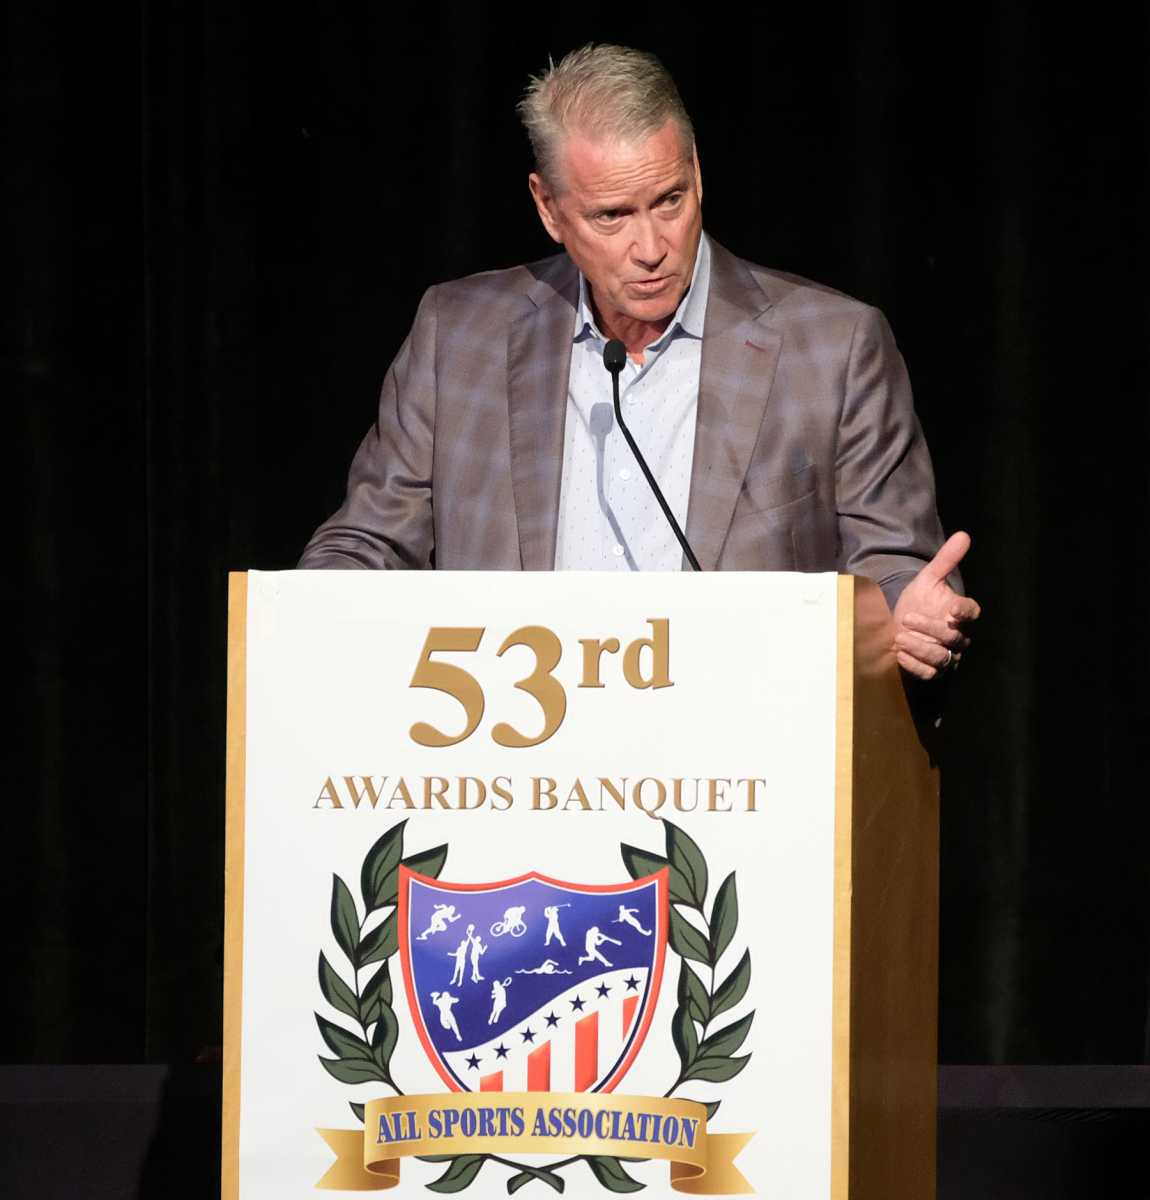 Baseball Hall of Fame pitcher Tom Glavine addresses the audience during the 53rd All Sports Association Awards Banquet held at the Emerald Coast Convention Center.